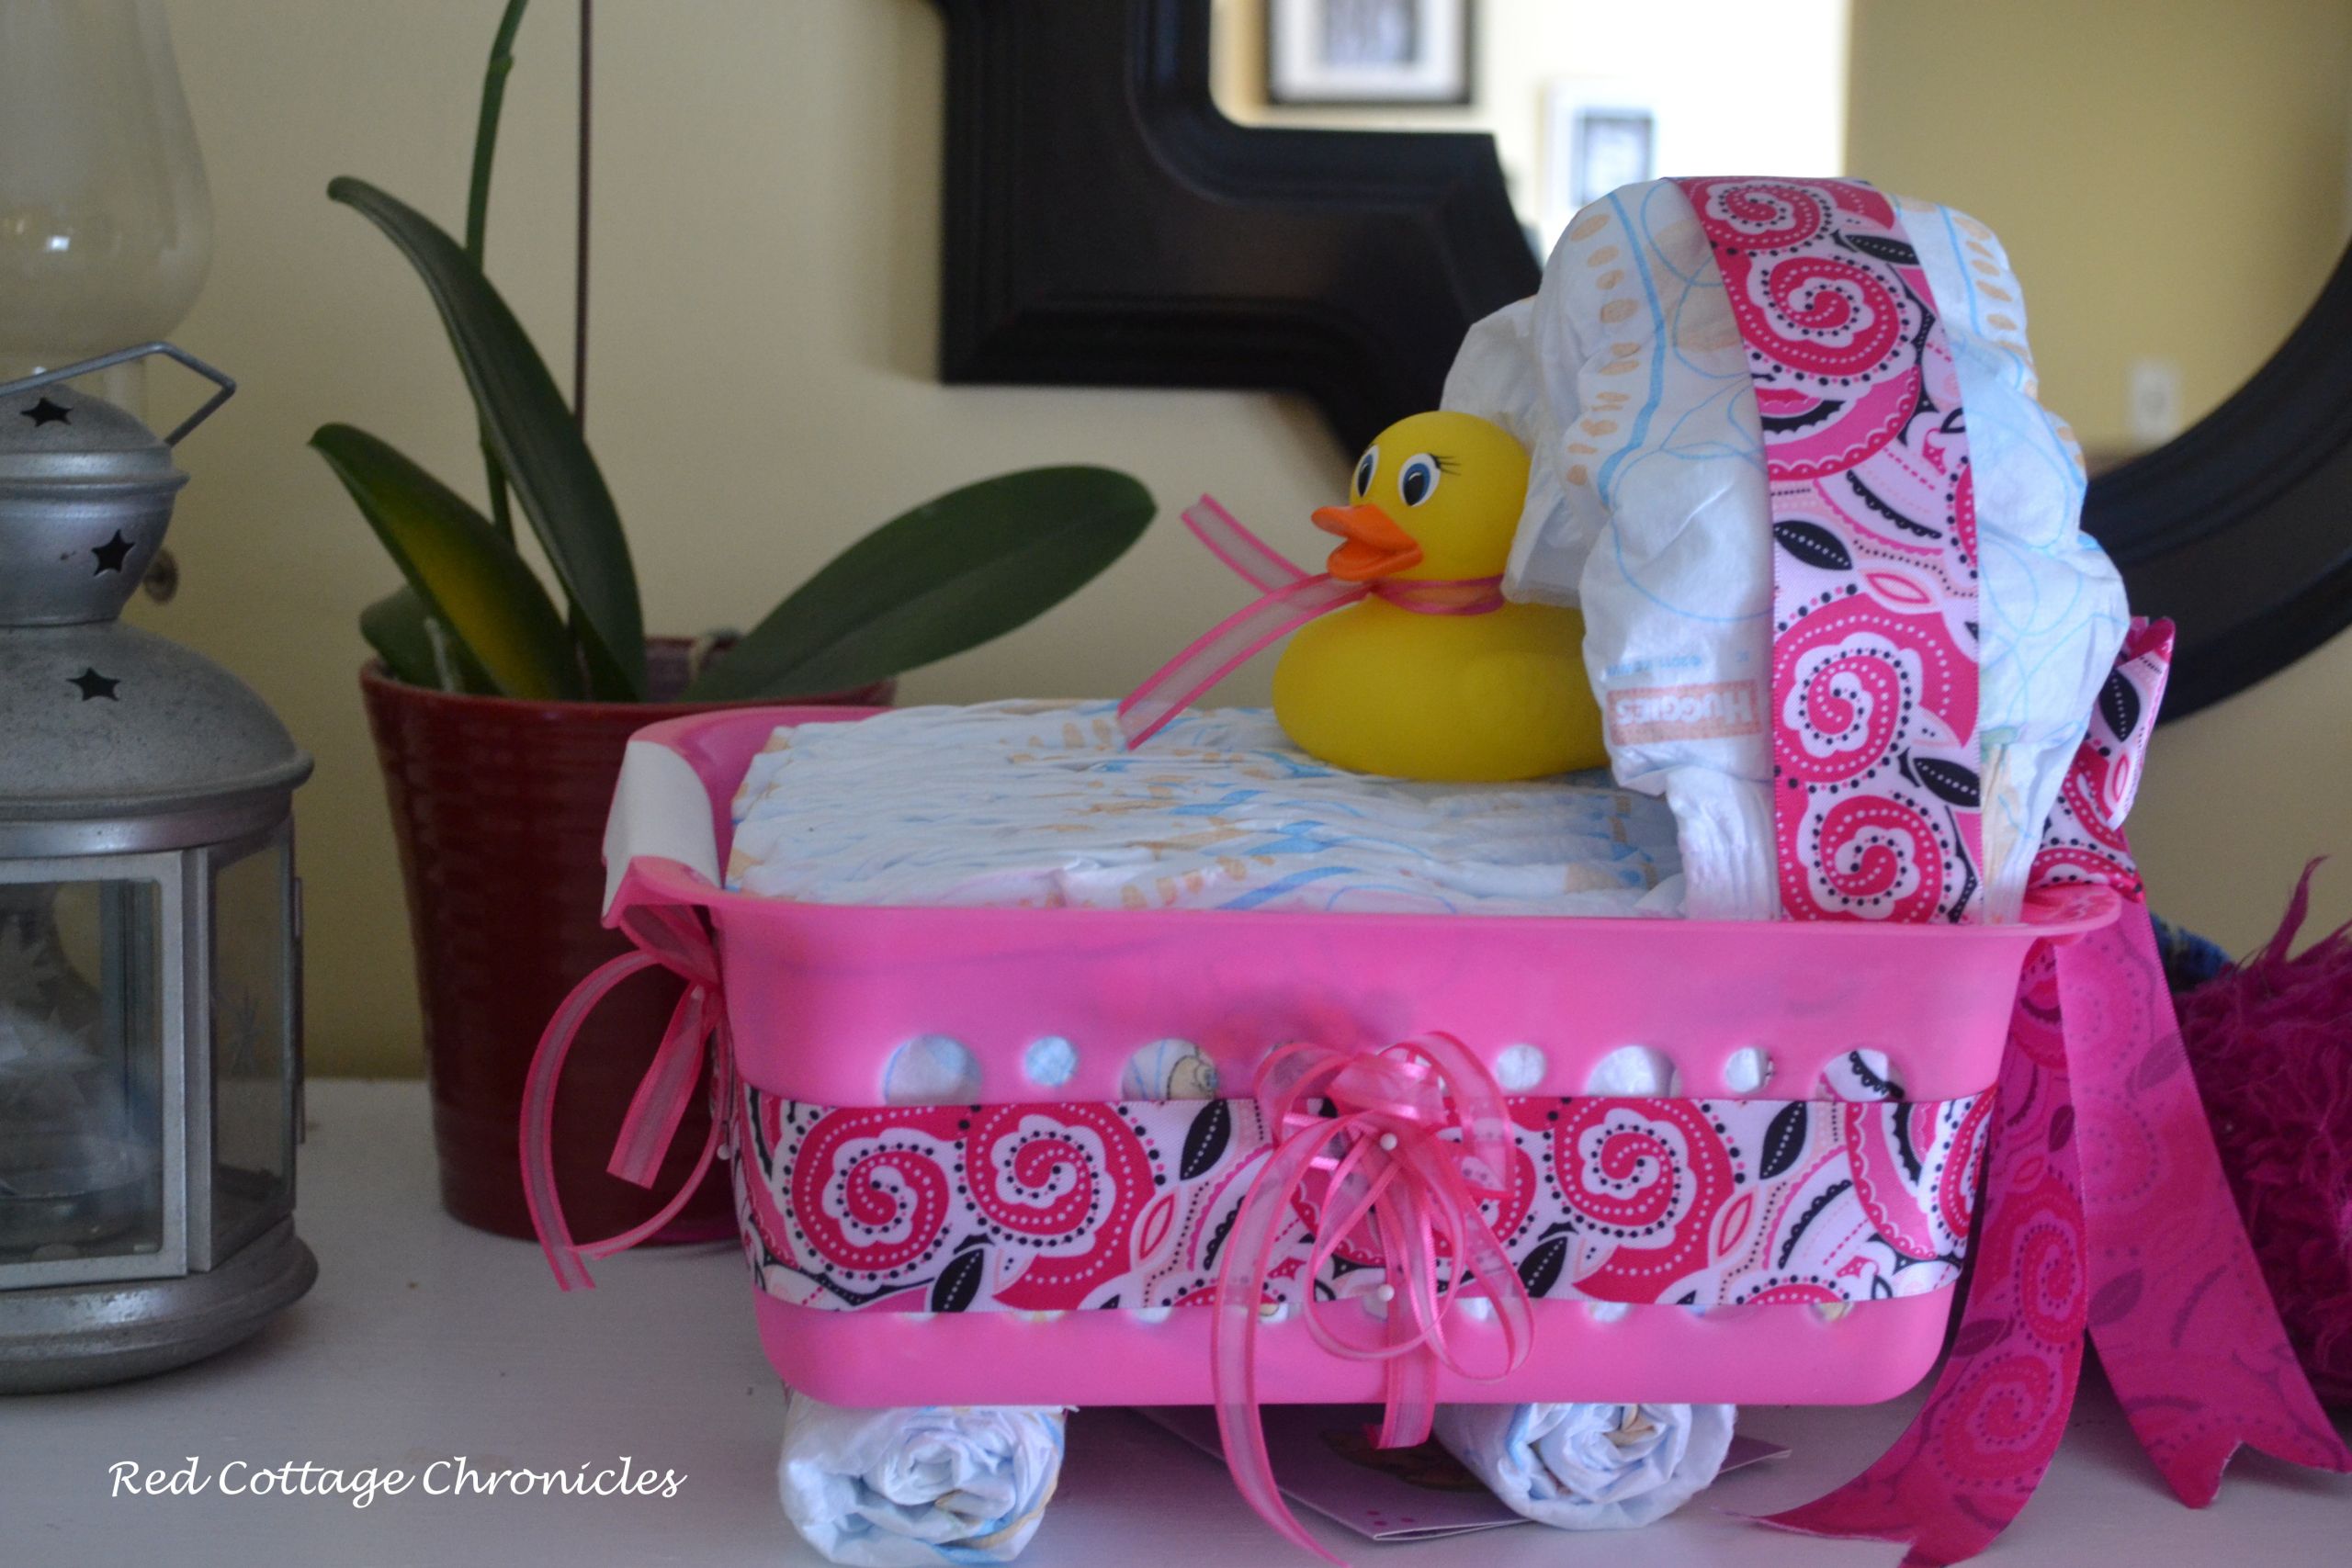 Baby Gift Ideas For Girls
 This Baby Shower Gift Idea is a practical t any new mom